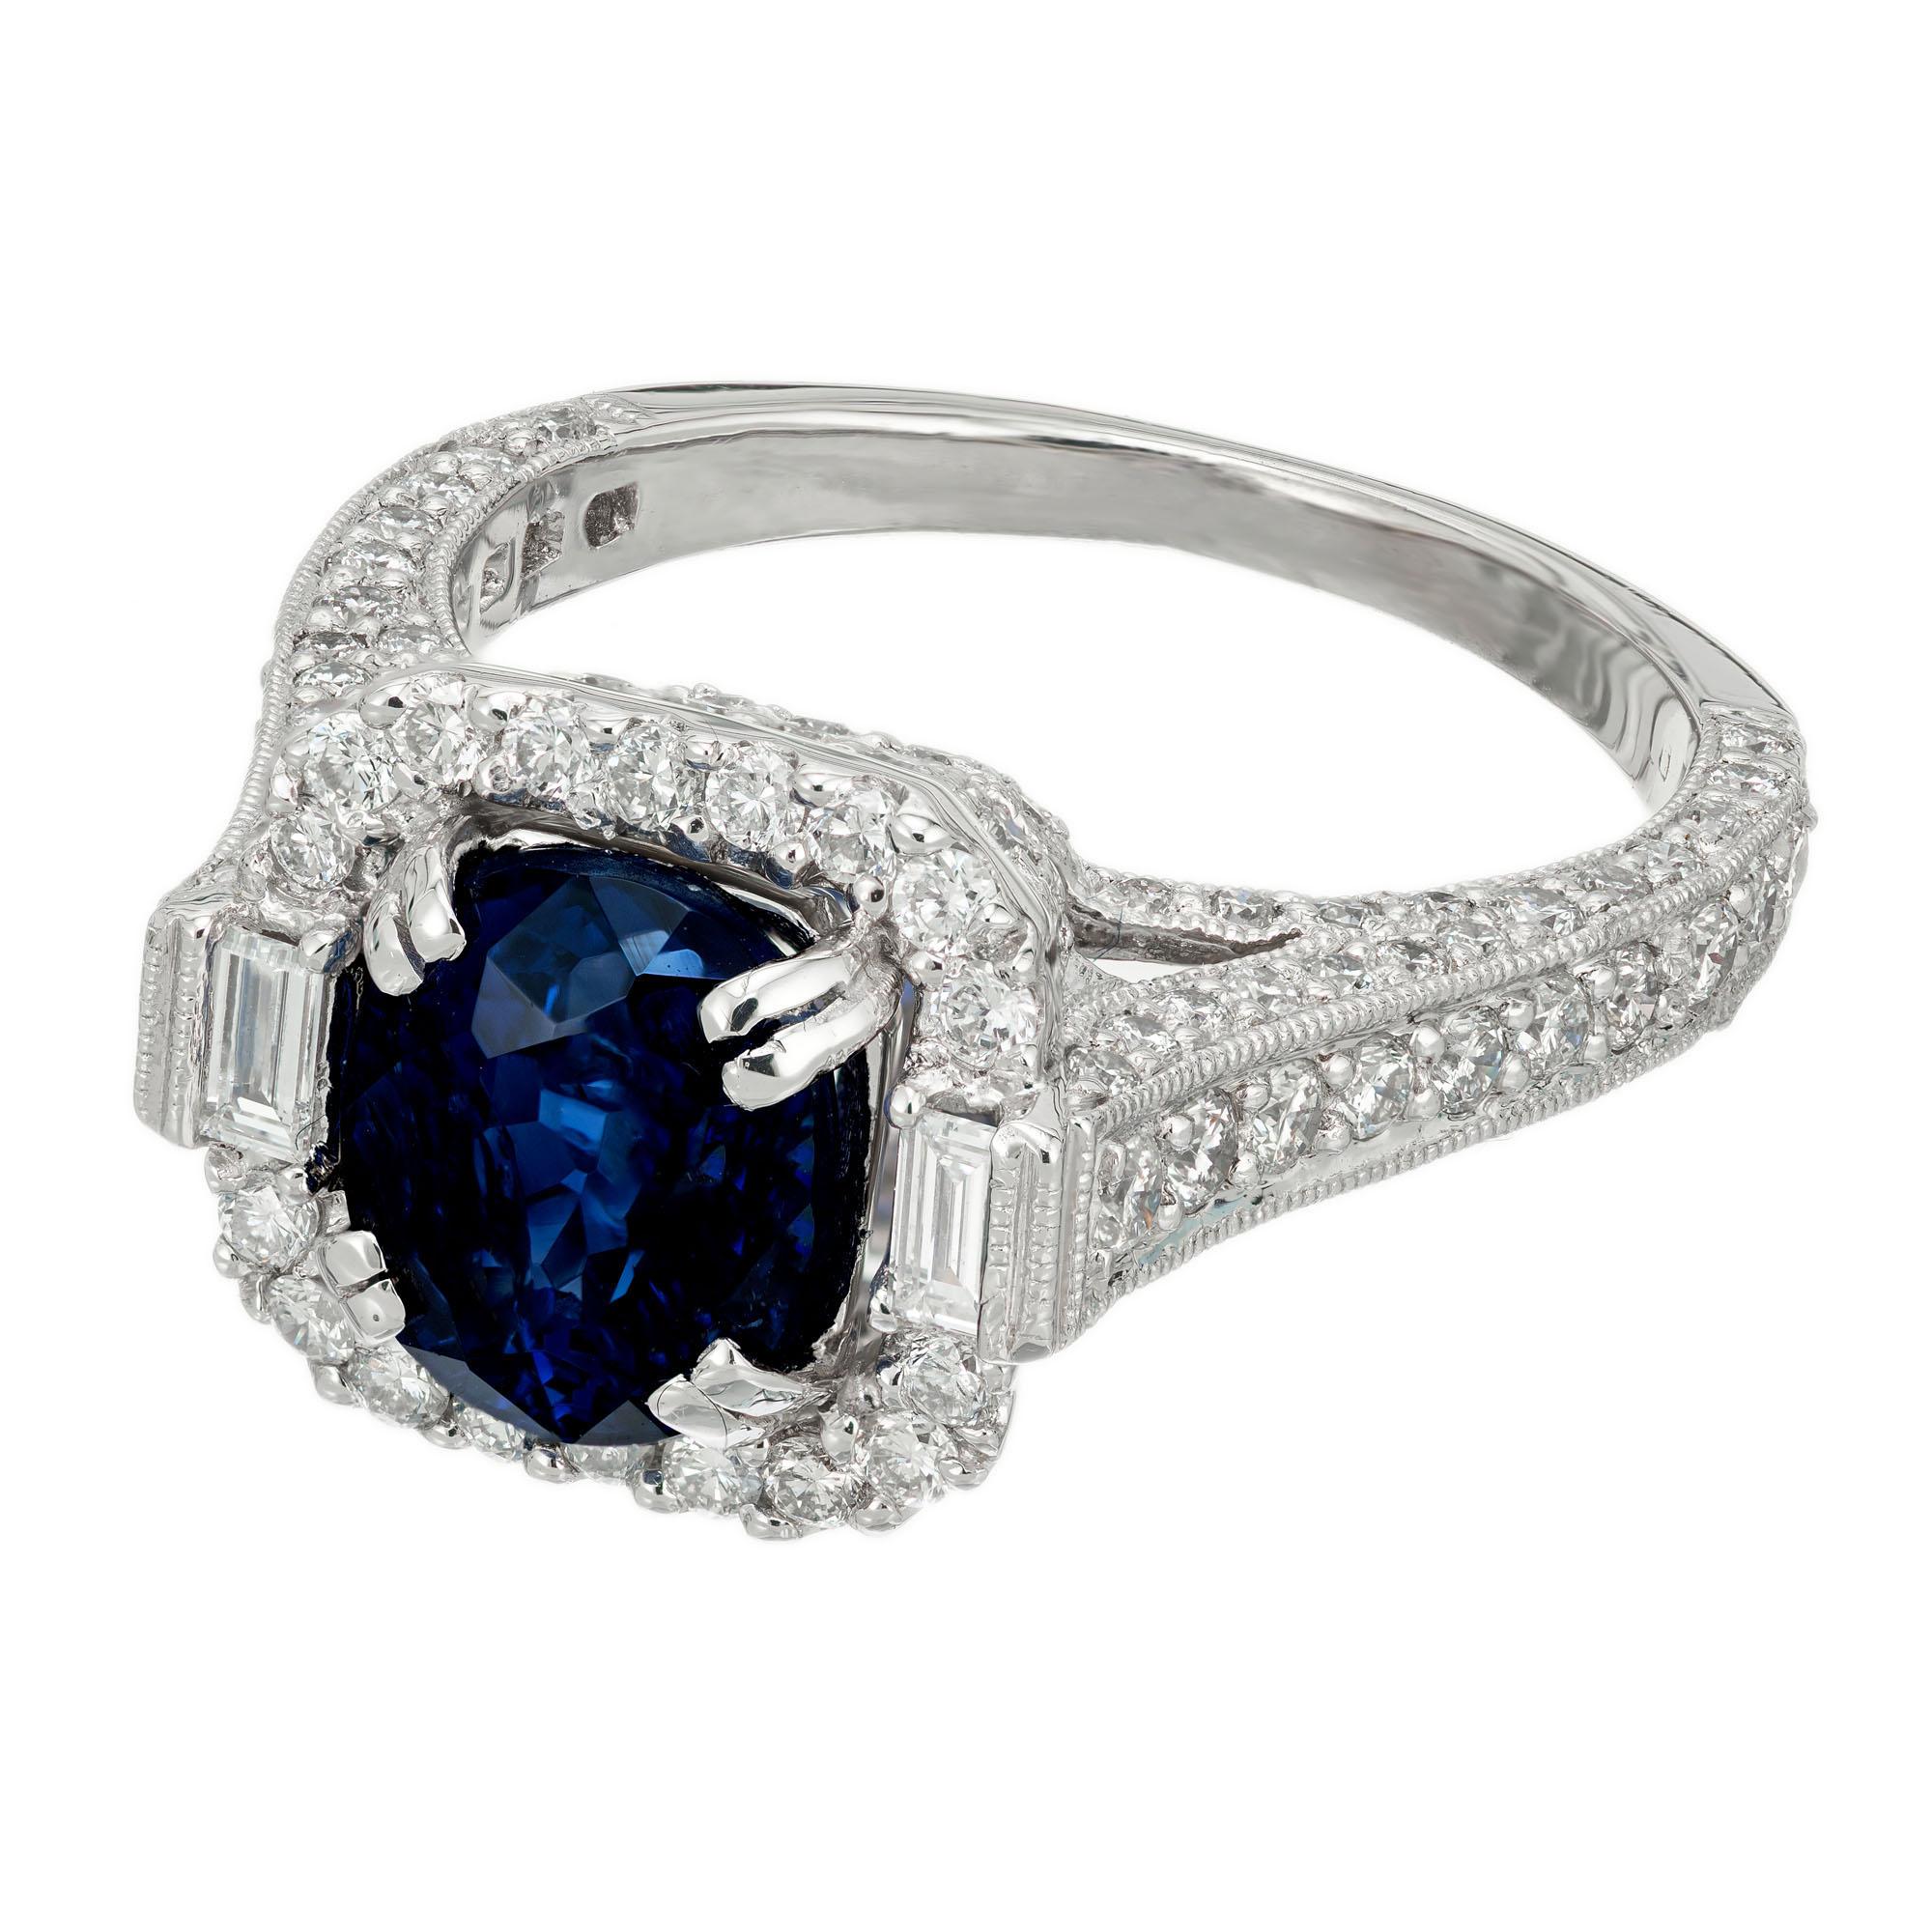 2.87 Carat Oval Blue Sapphire Diamond Halo Platinum Engagement Ring In Good Condition For Sale In Stamford, CT